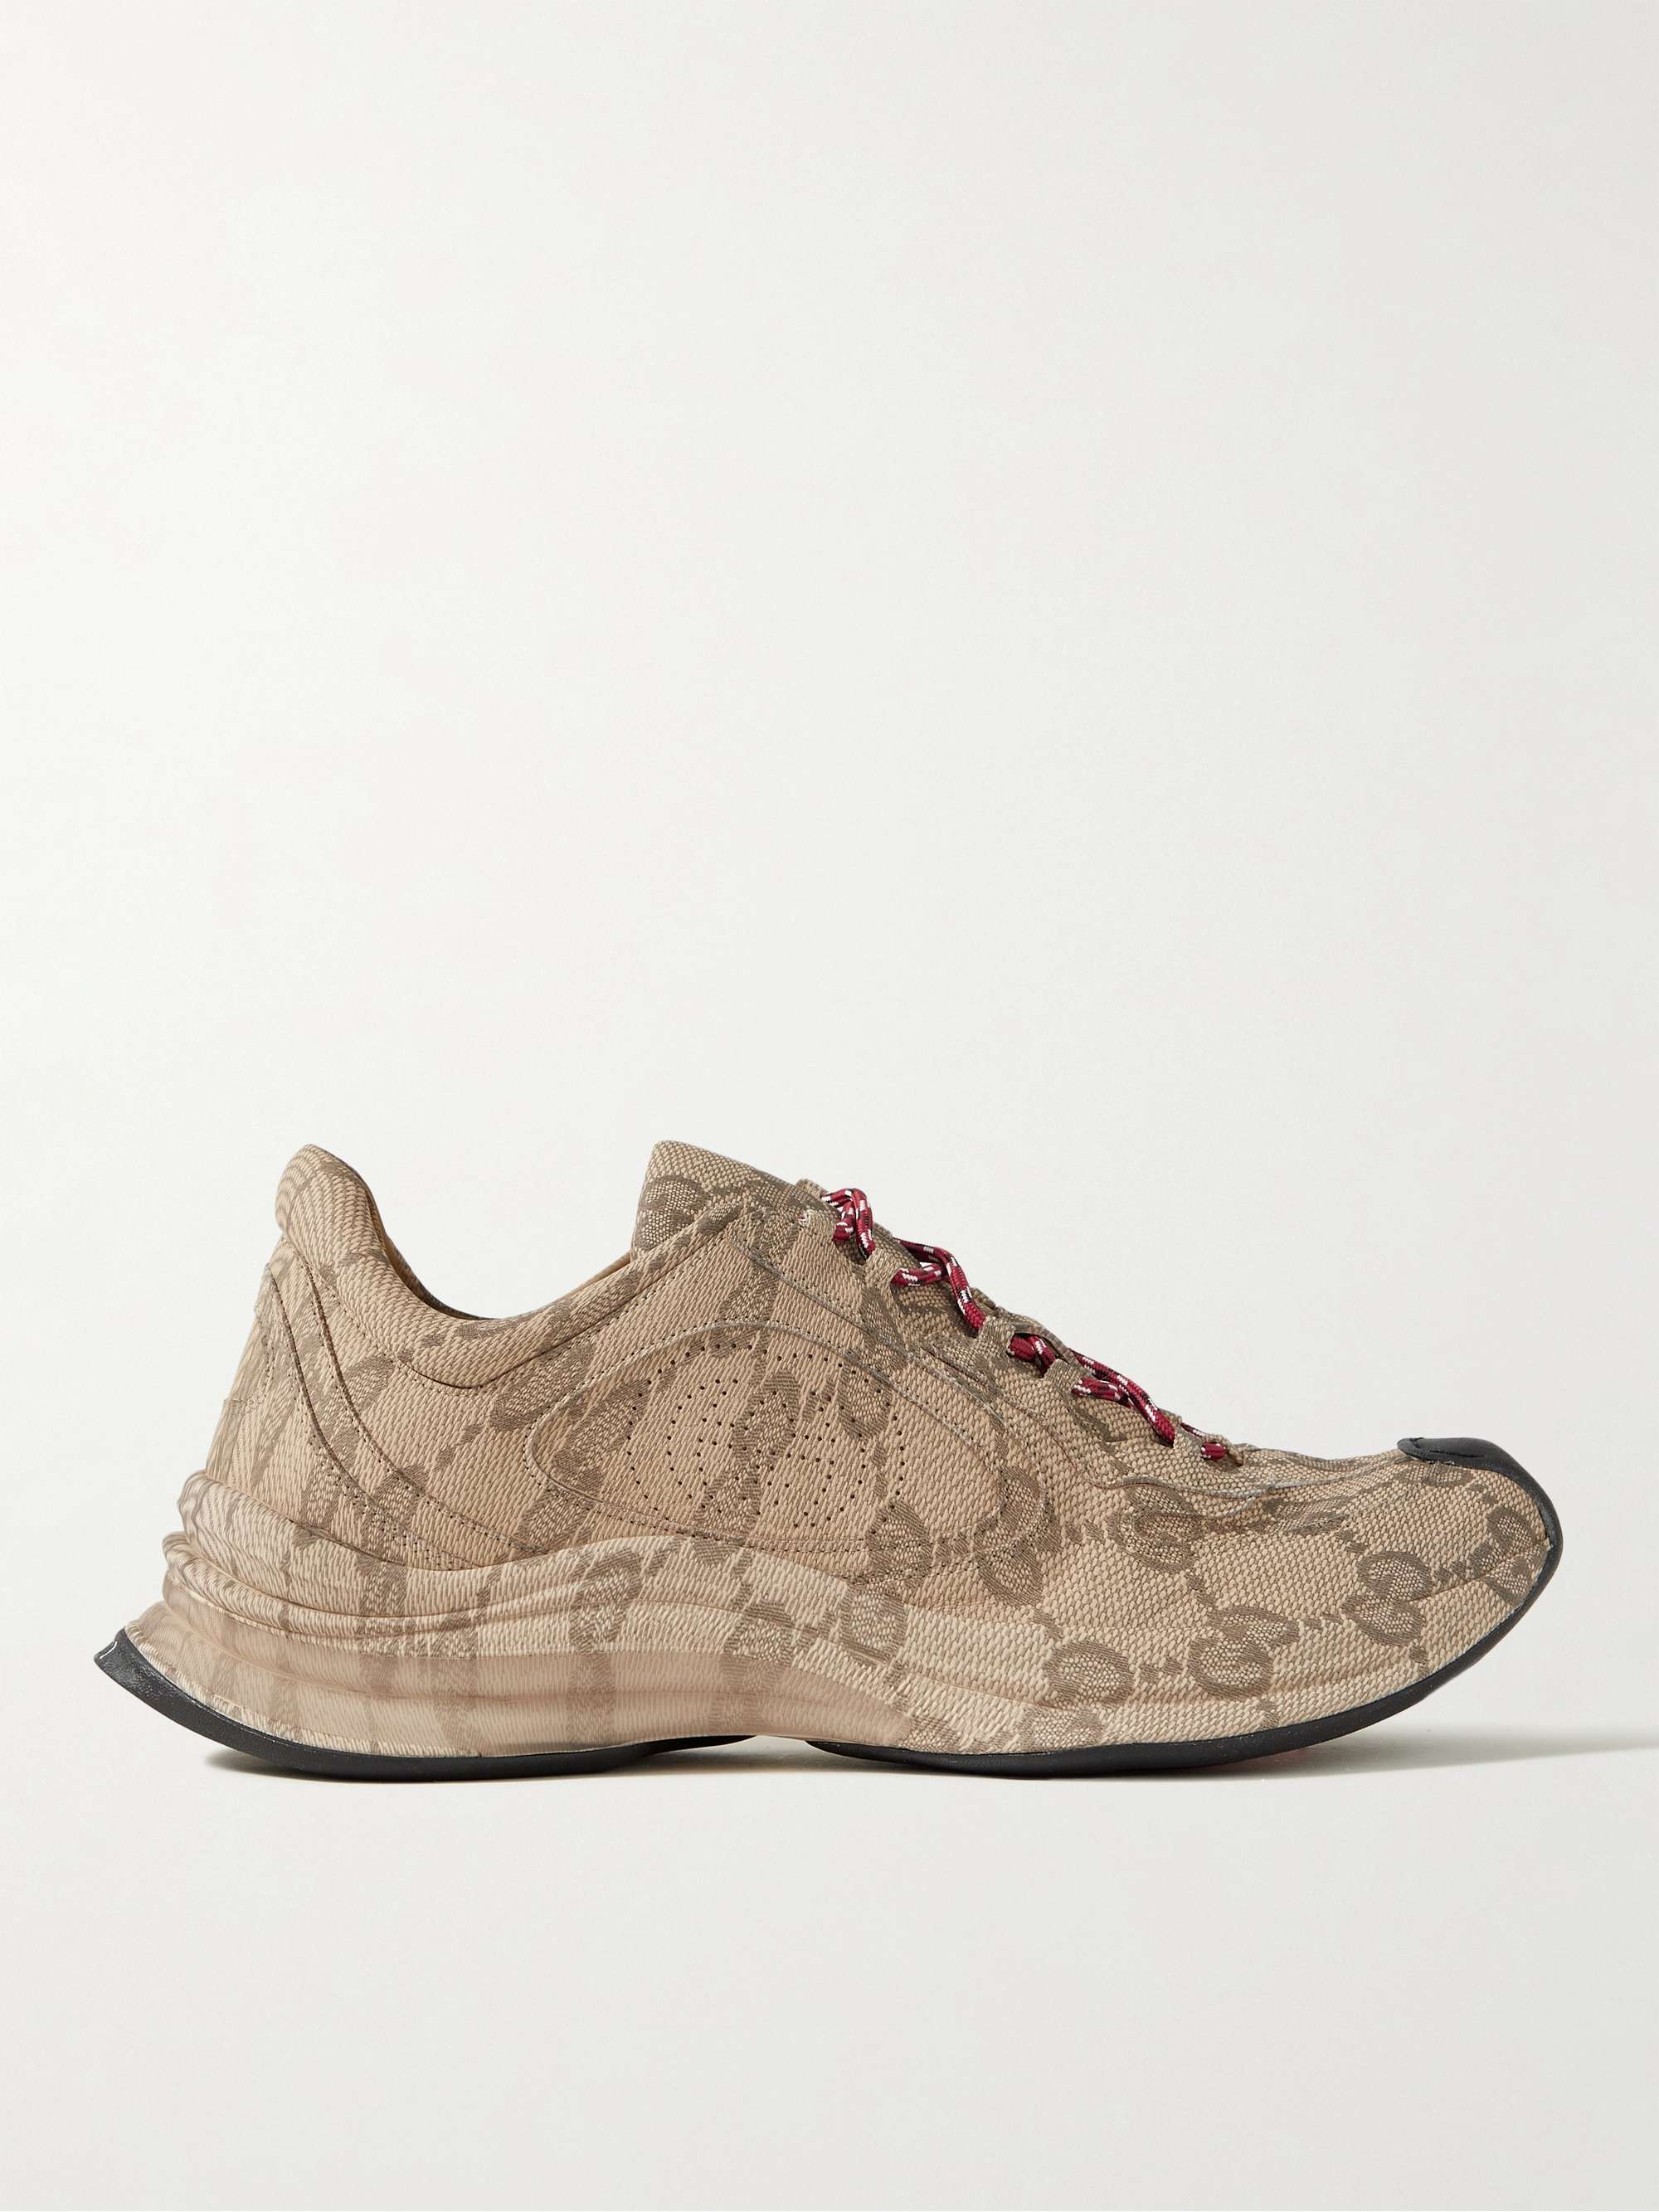 GUCCI Logo-Print Leather Sneakers | MR PORTER